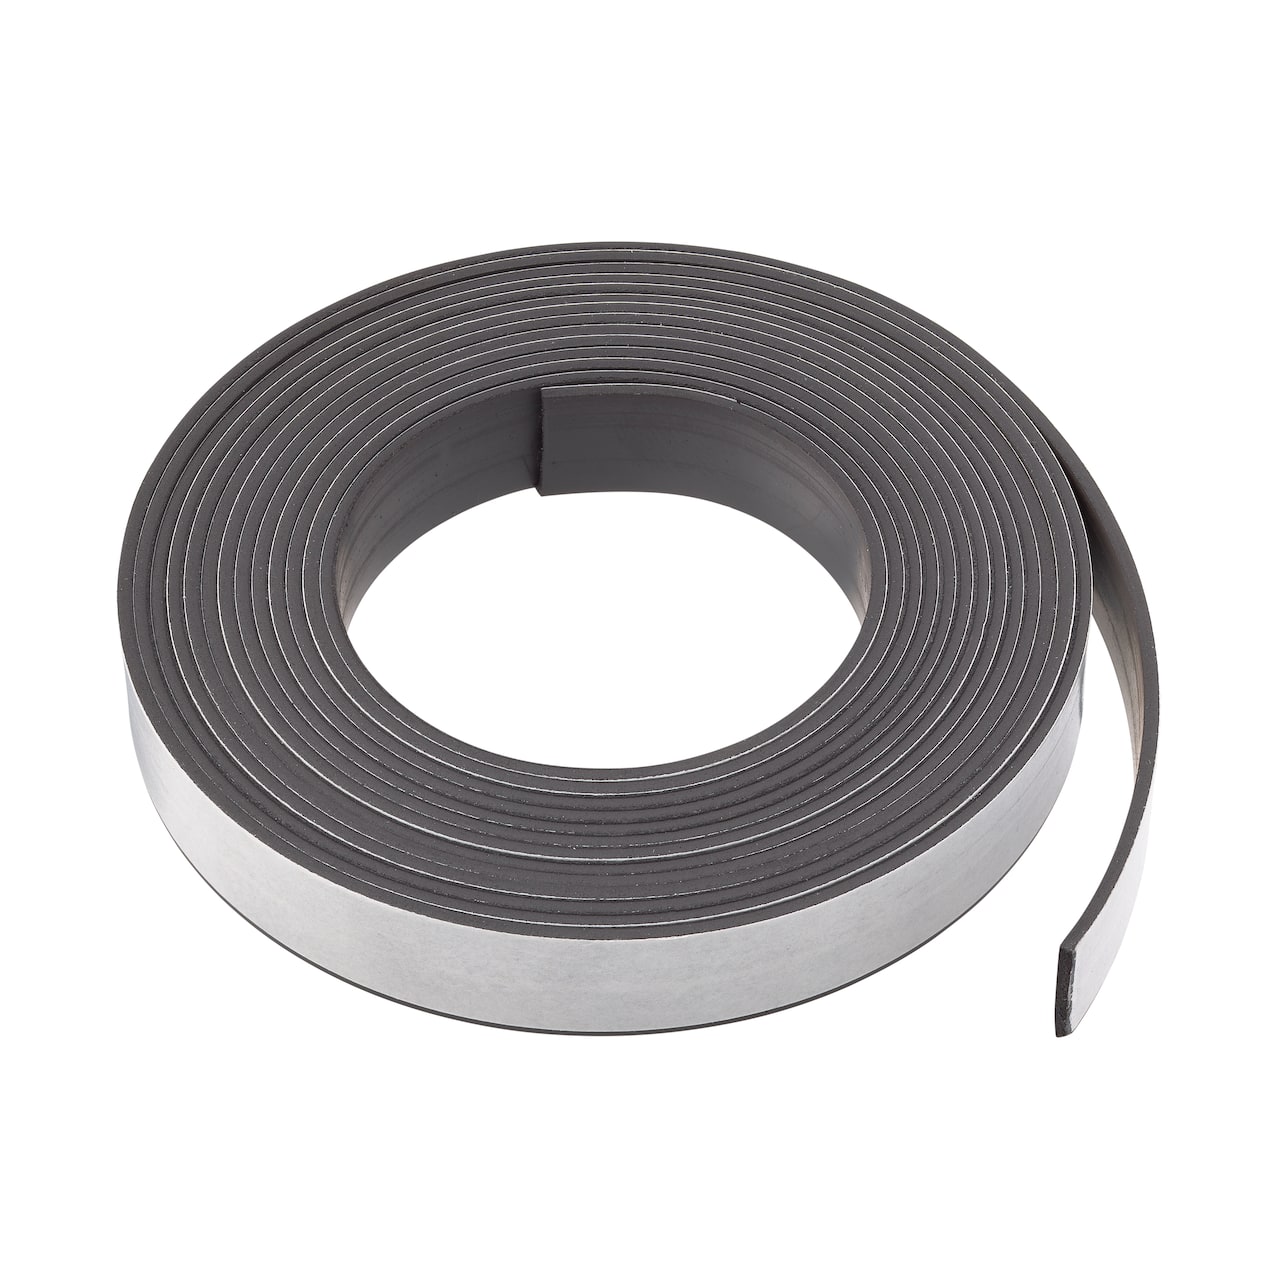 Pro MAG&#xAE; Magnetic Tape, .5&#x22; x 10&#x22;